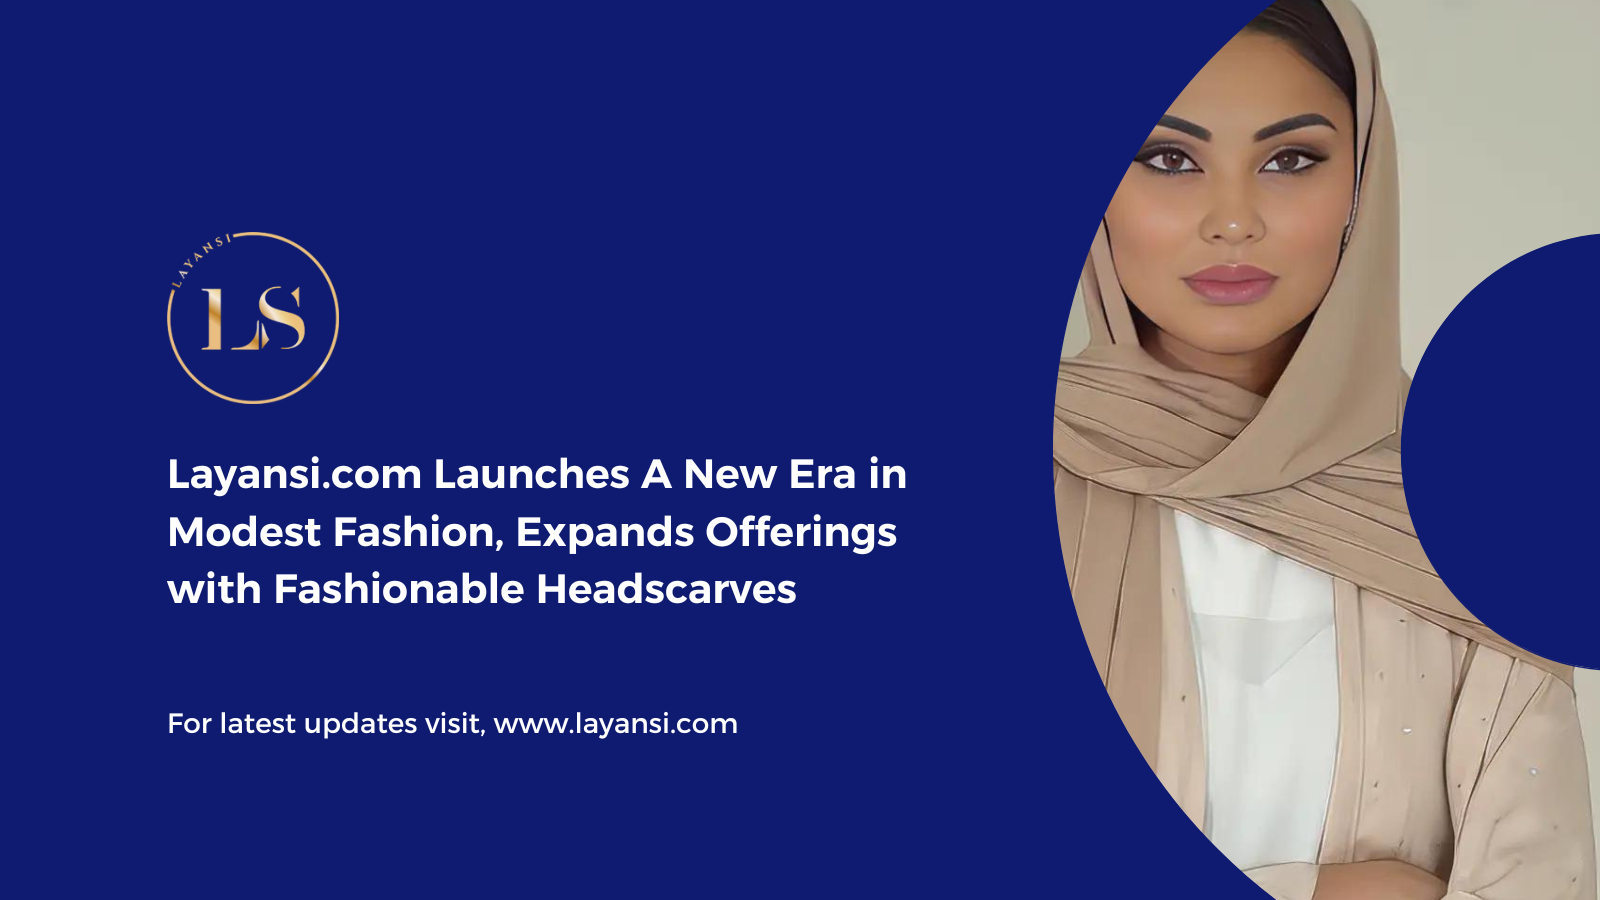 Layansi.com Launches A New Era in Modest Fashion, Expands Offerings with Fashionable Headscarves